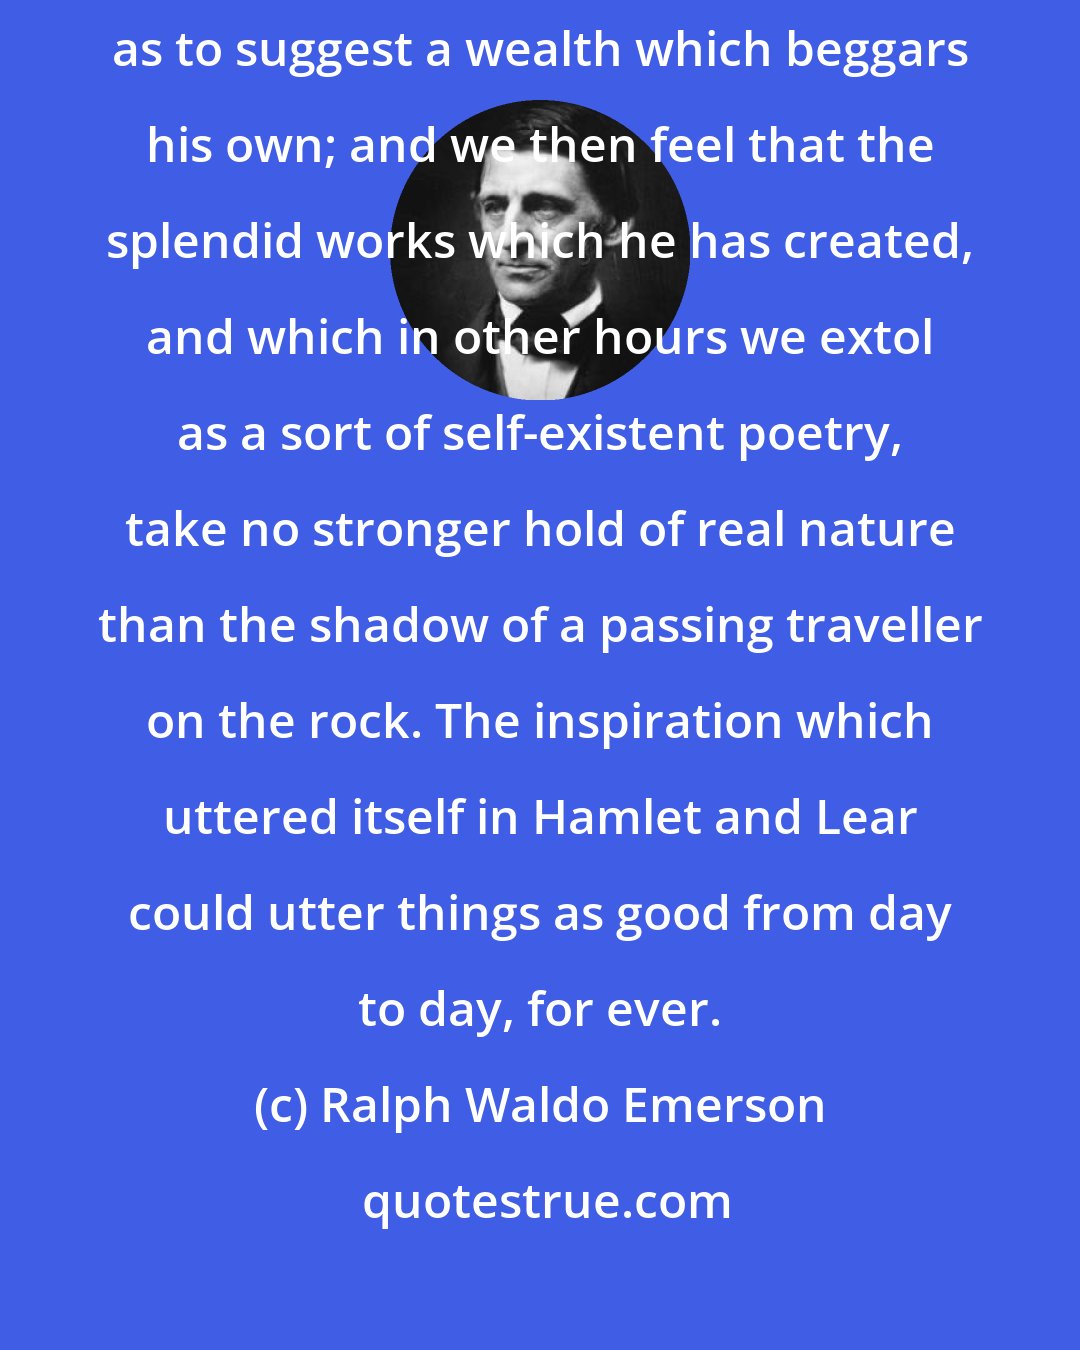 Ralph Waldo Emerson: Shakespeare carries us to such a lofty strain of intelligent activity, as to suggest a wealth which beggars his own; and we then feel that the splendid works which he has created, and which in other hours we extol as a sort of self-existent poetry, take no stronger hold of real nature than the shadow of a passing traveller on the rock. The inspiration which uttered itself in Hamlet and Lear could utter things as good from day to day, for ever.